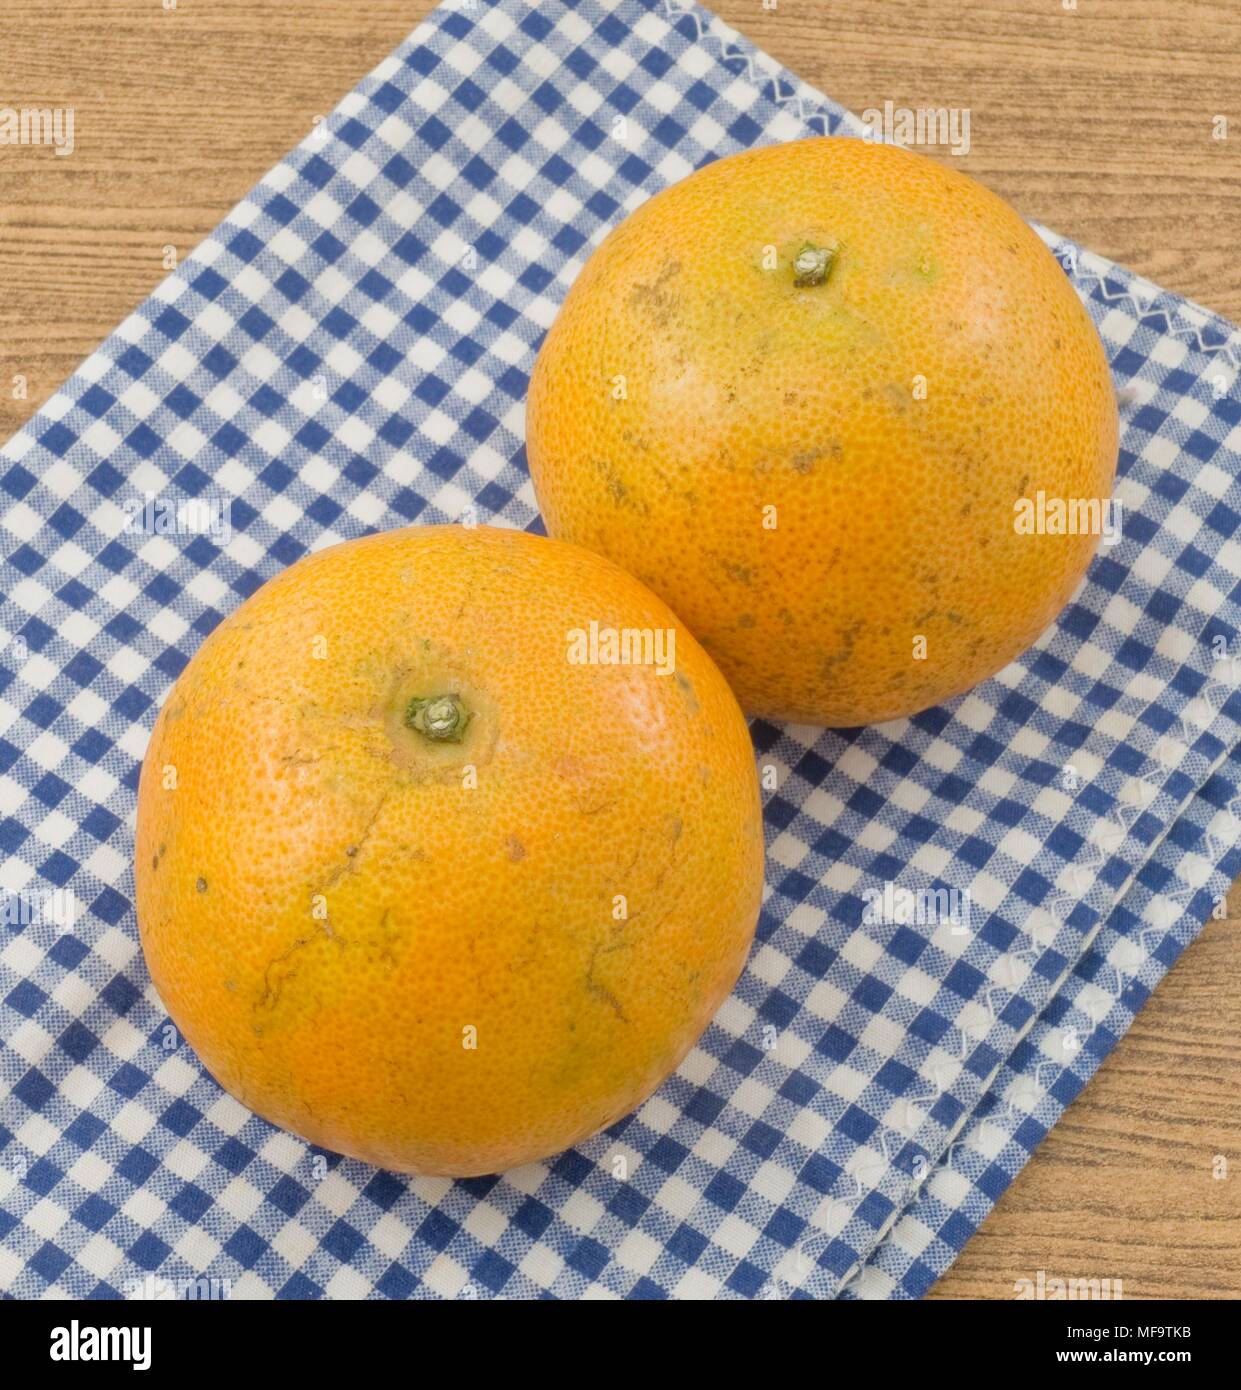 Two Ripe and Sweet Oranges on Wooden Table, Orange Is The Fruit of The Citrus Species. Stock Photo